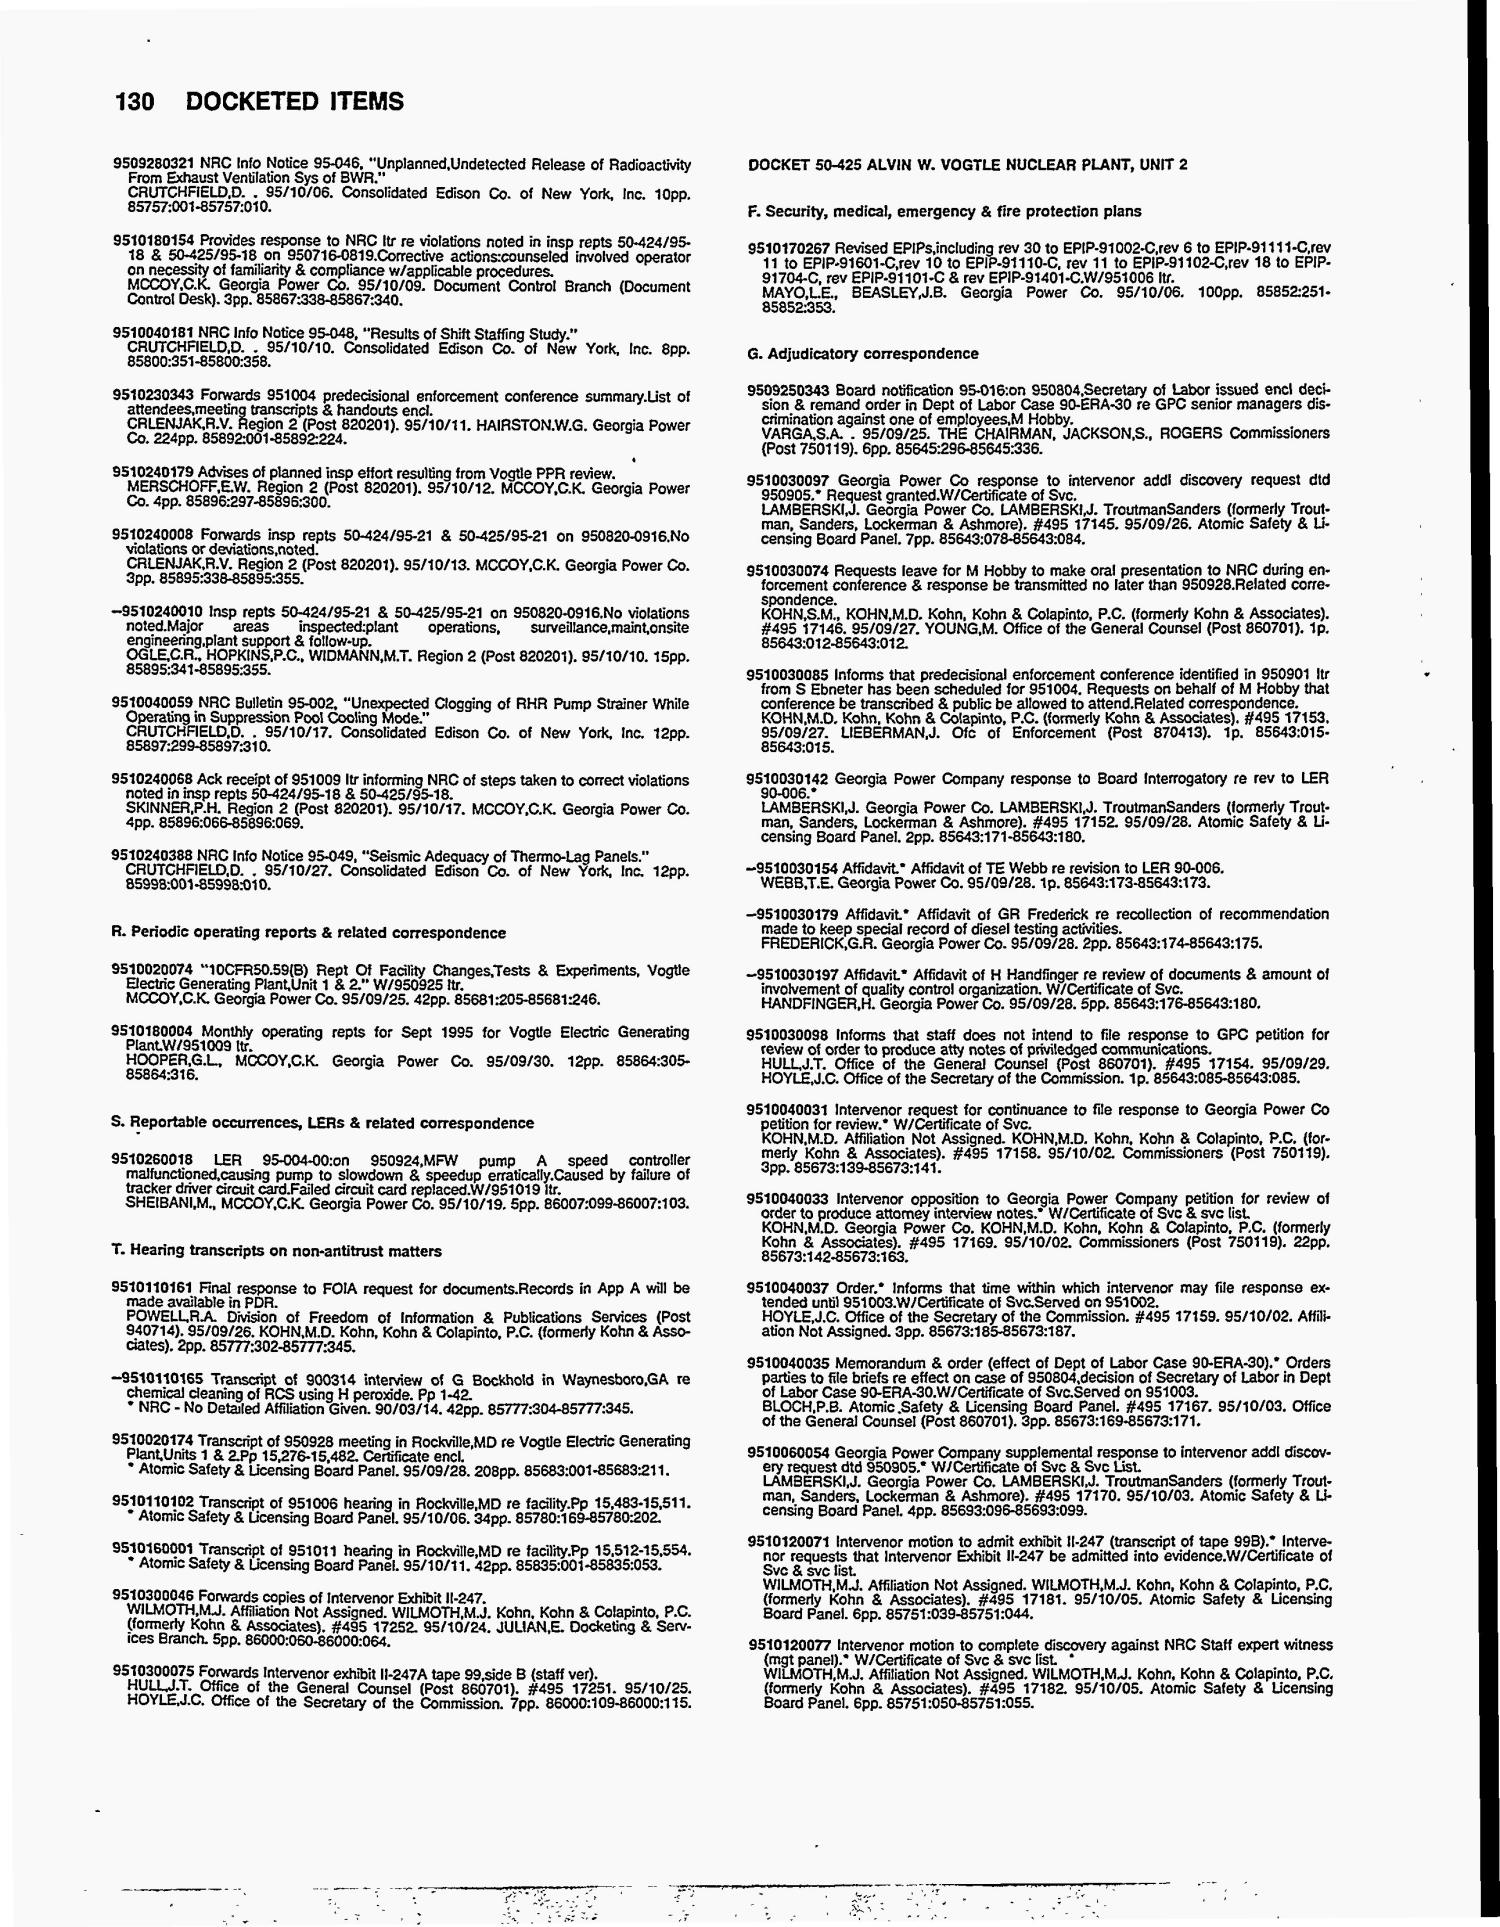 Title list of documents made publicly available. Volume 17, No. 10